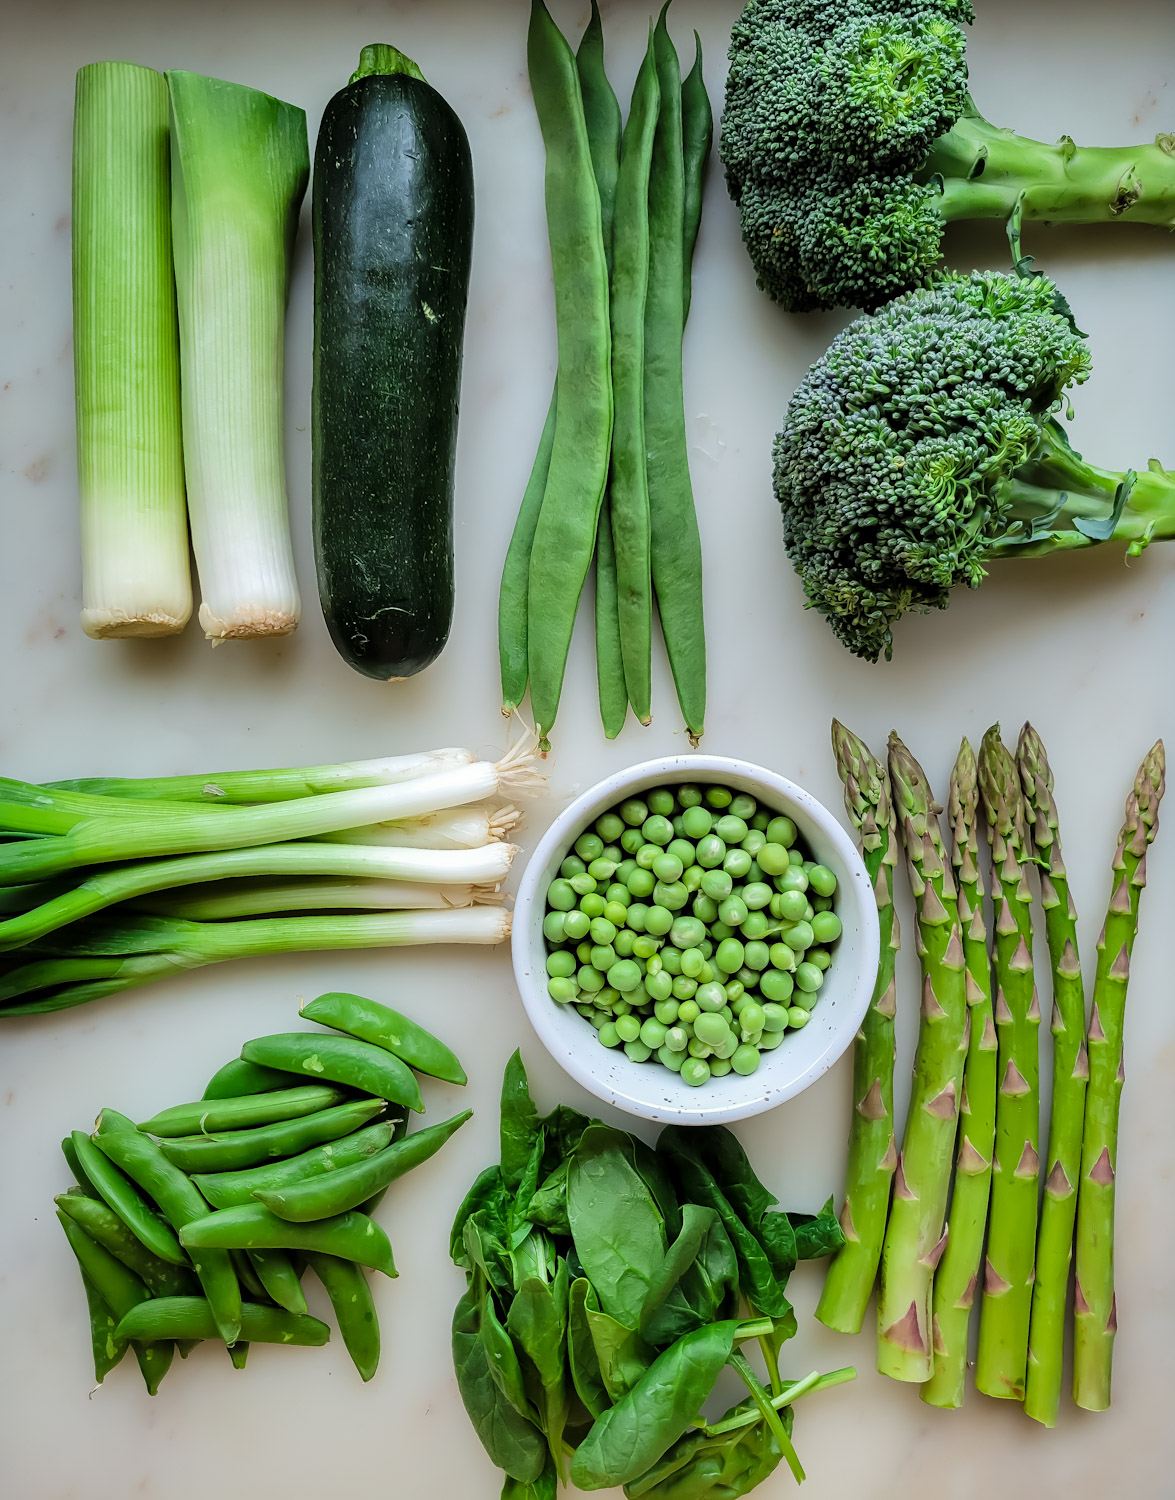 Fresh Spring Green vegetables are laid out in a grid. Leeks, zucchini, runner beans, broccoli, scallions, shelled peas, asparagus, snap peas and spinach